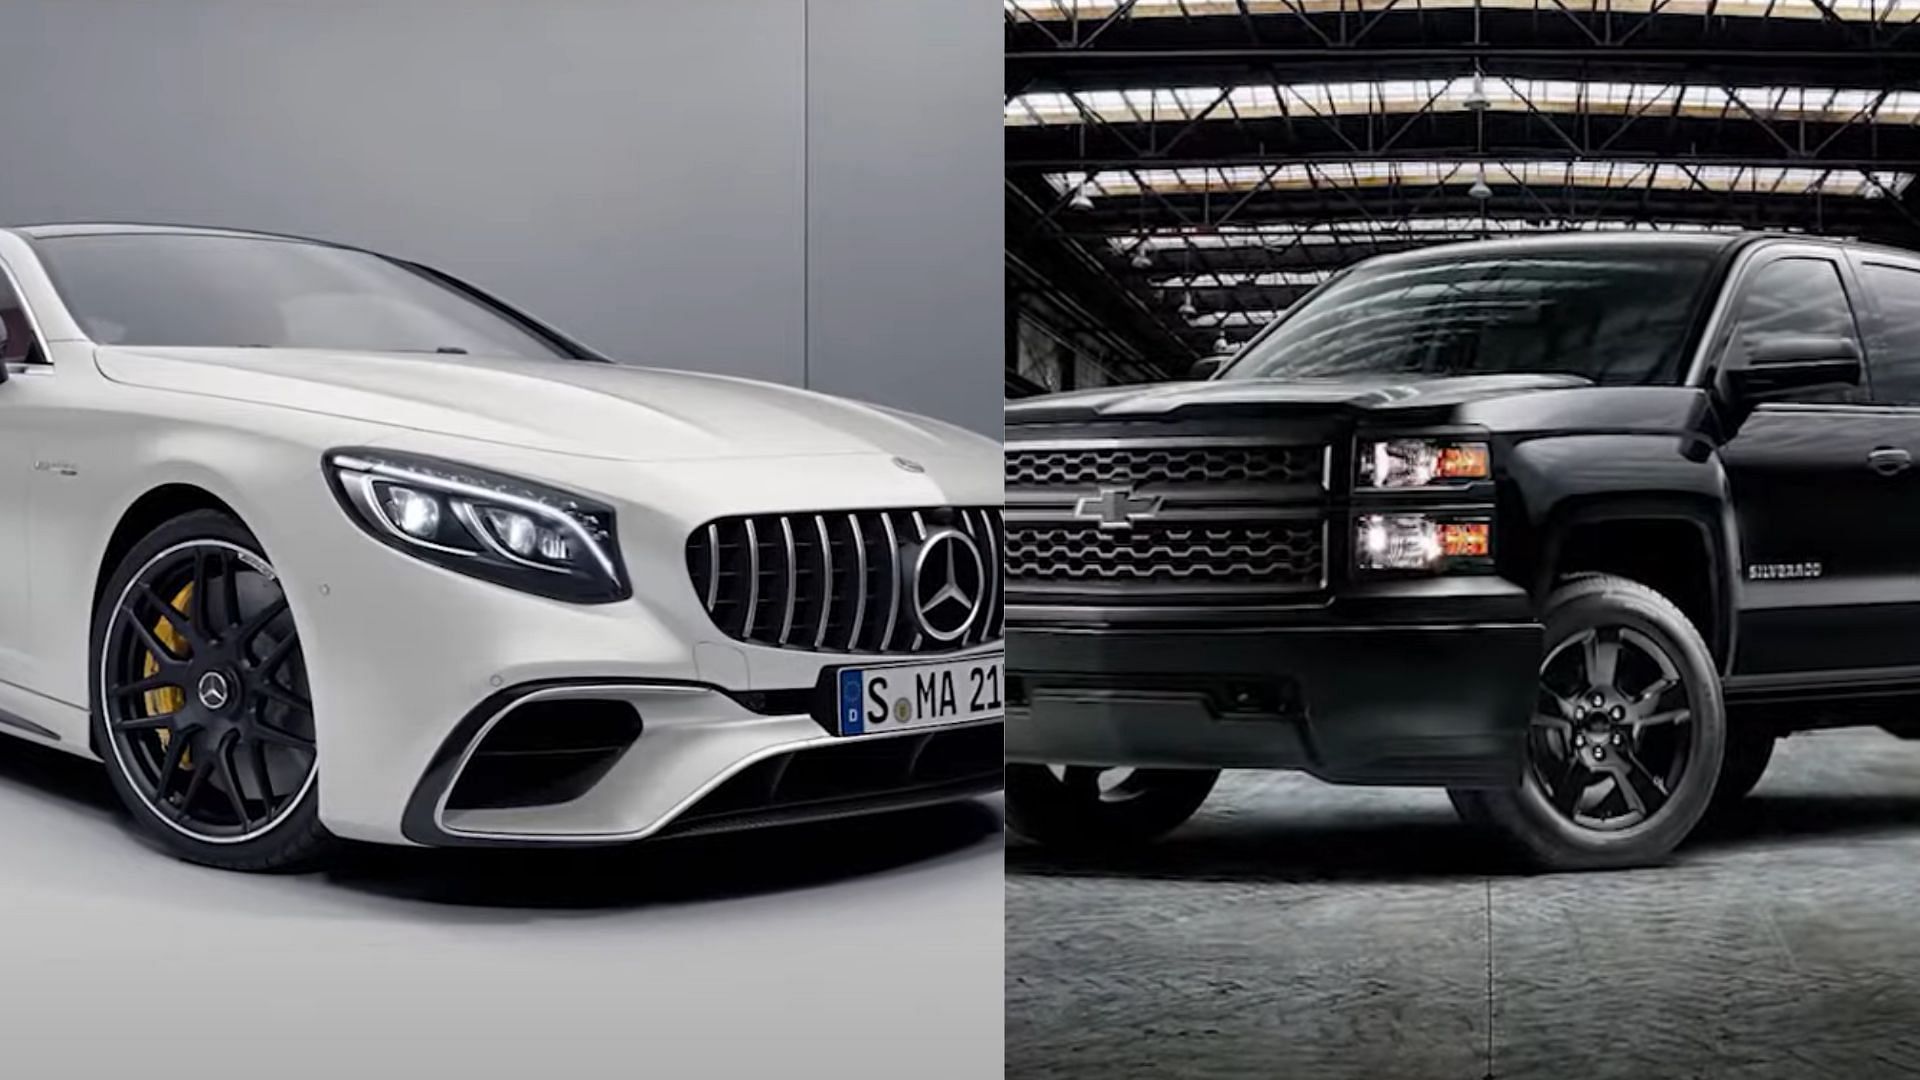 Mercedes SClass AMG and Chevy Silverado Midnight edition